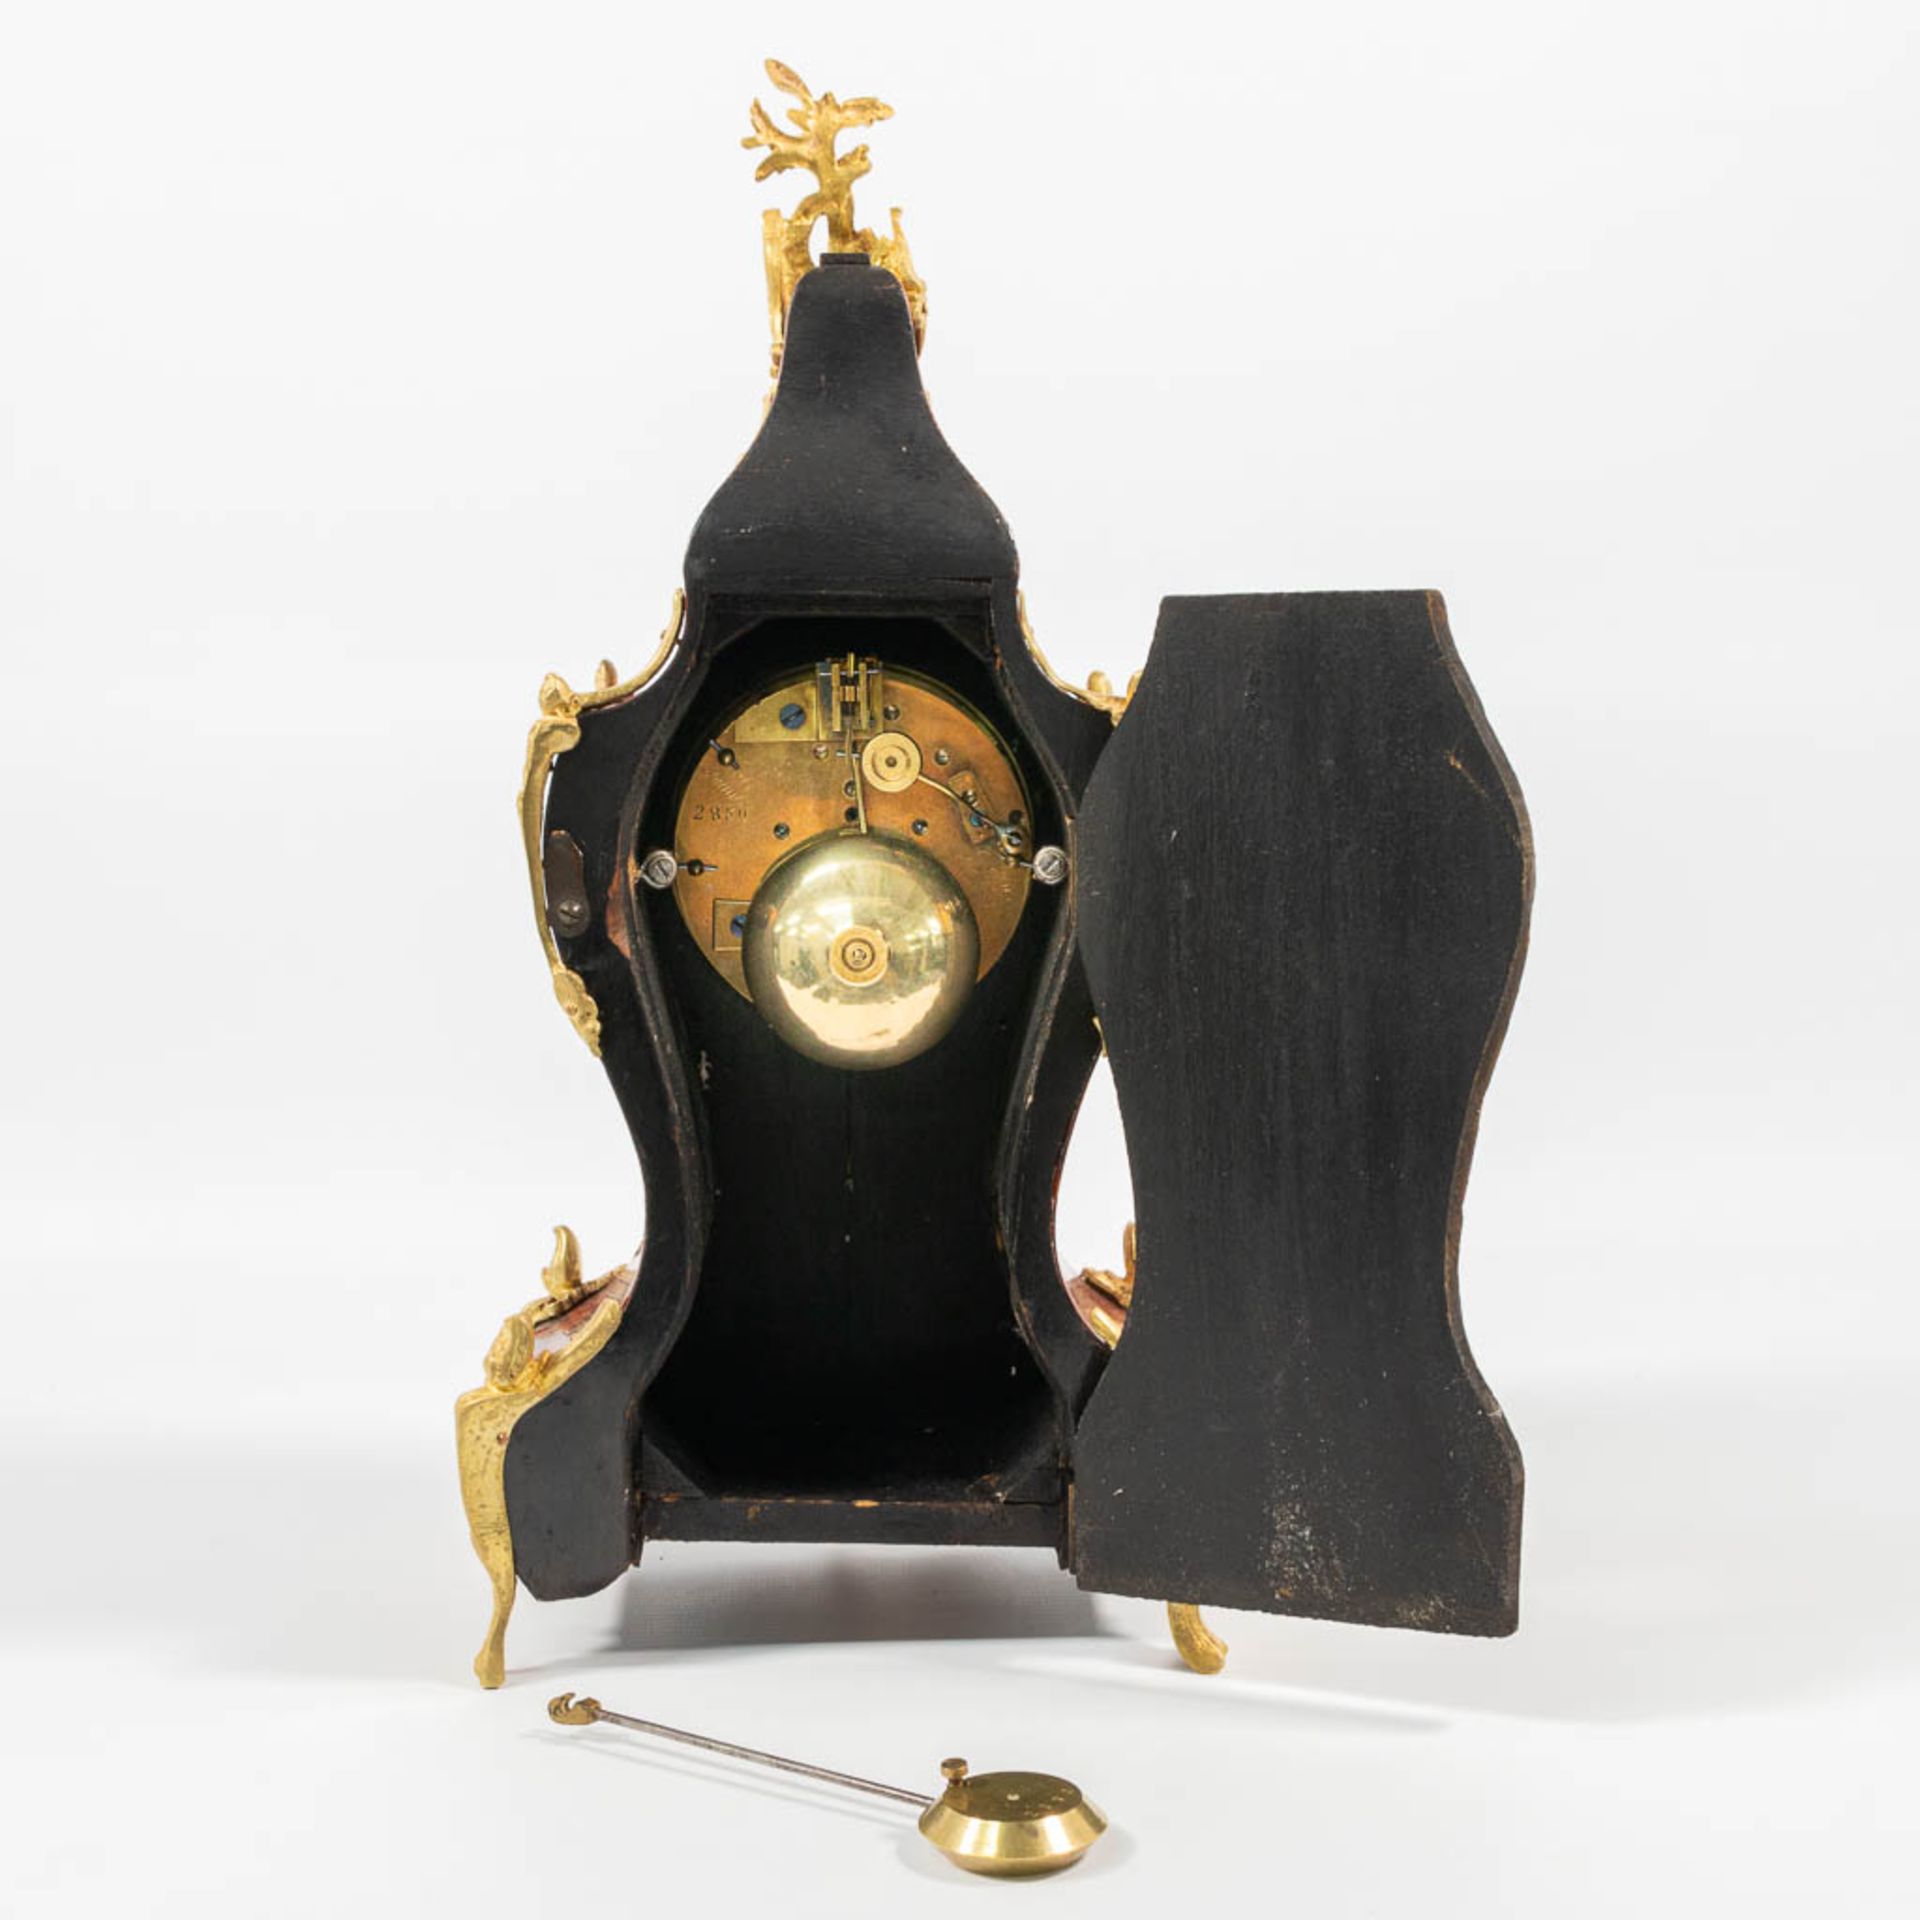 A Table clock made of wood decorated with Tortoise shell and Mount - Image 6 of 16